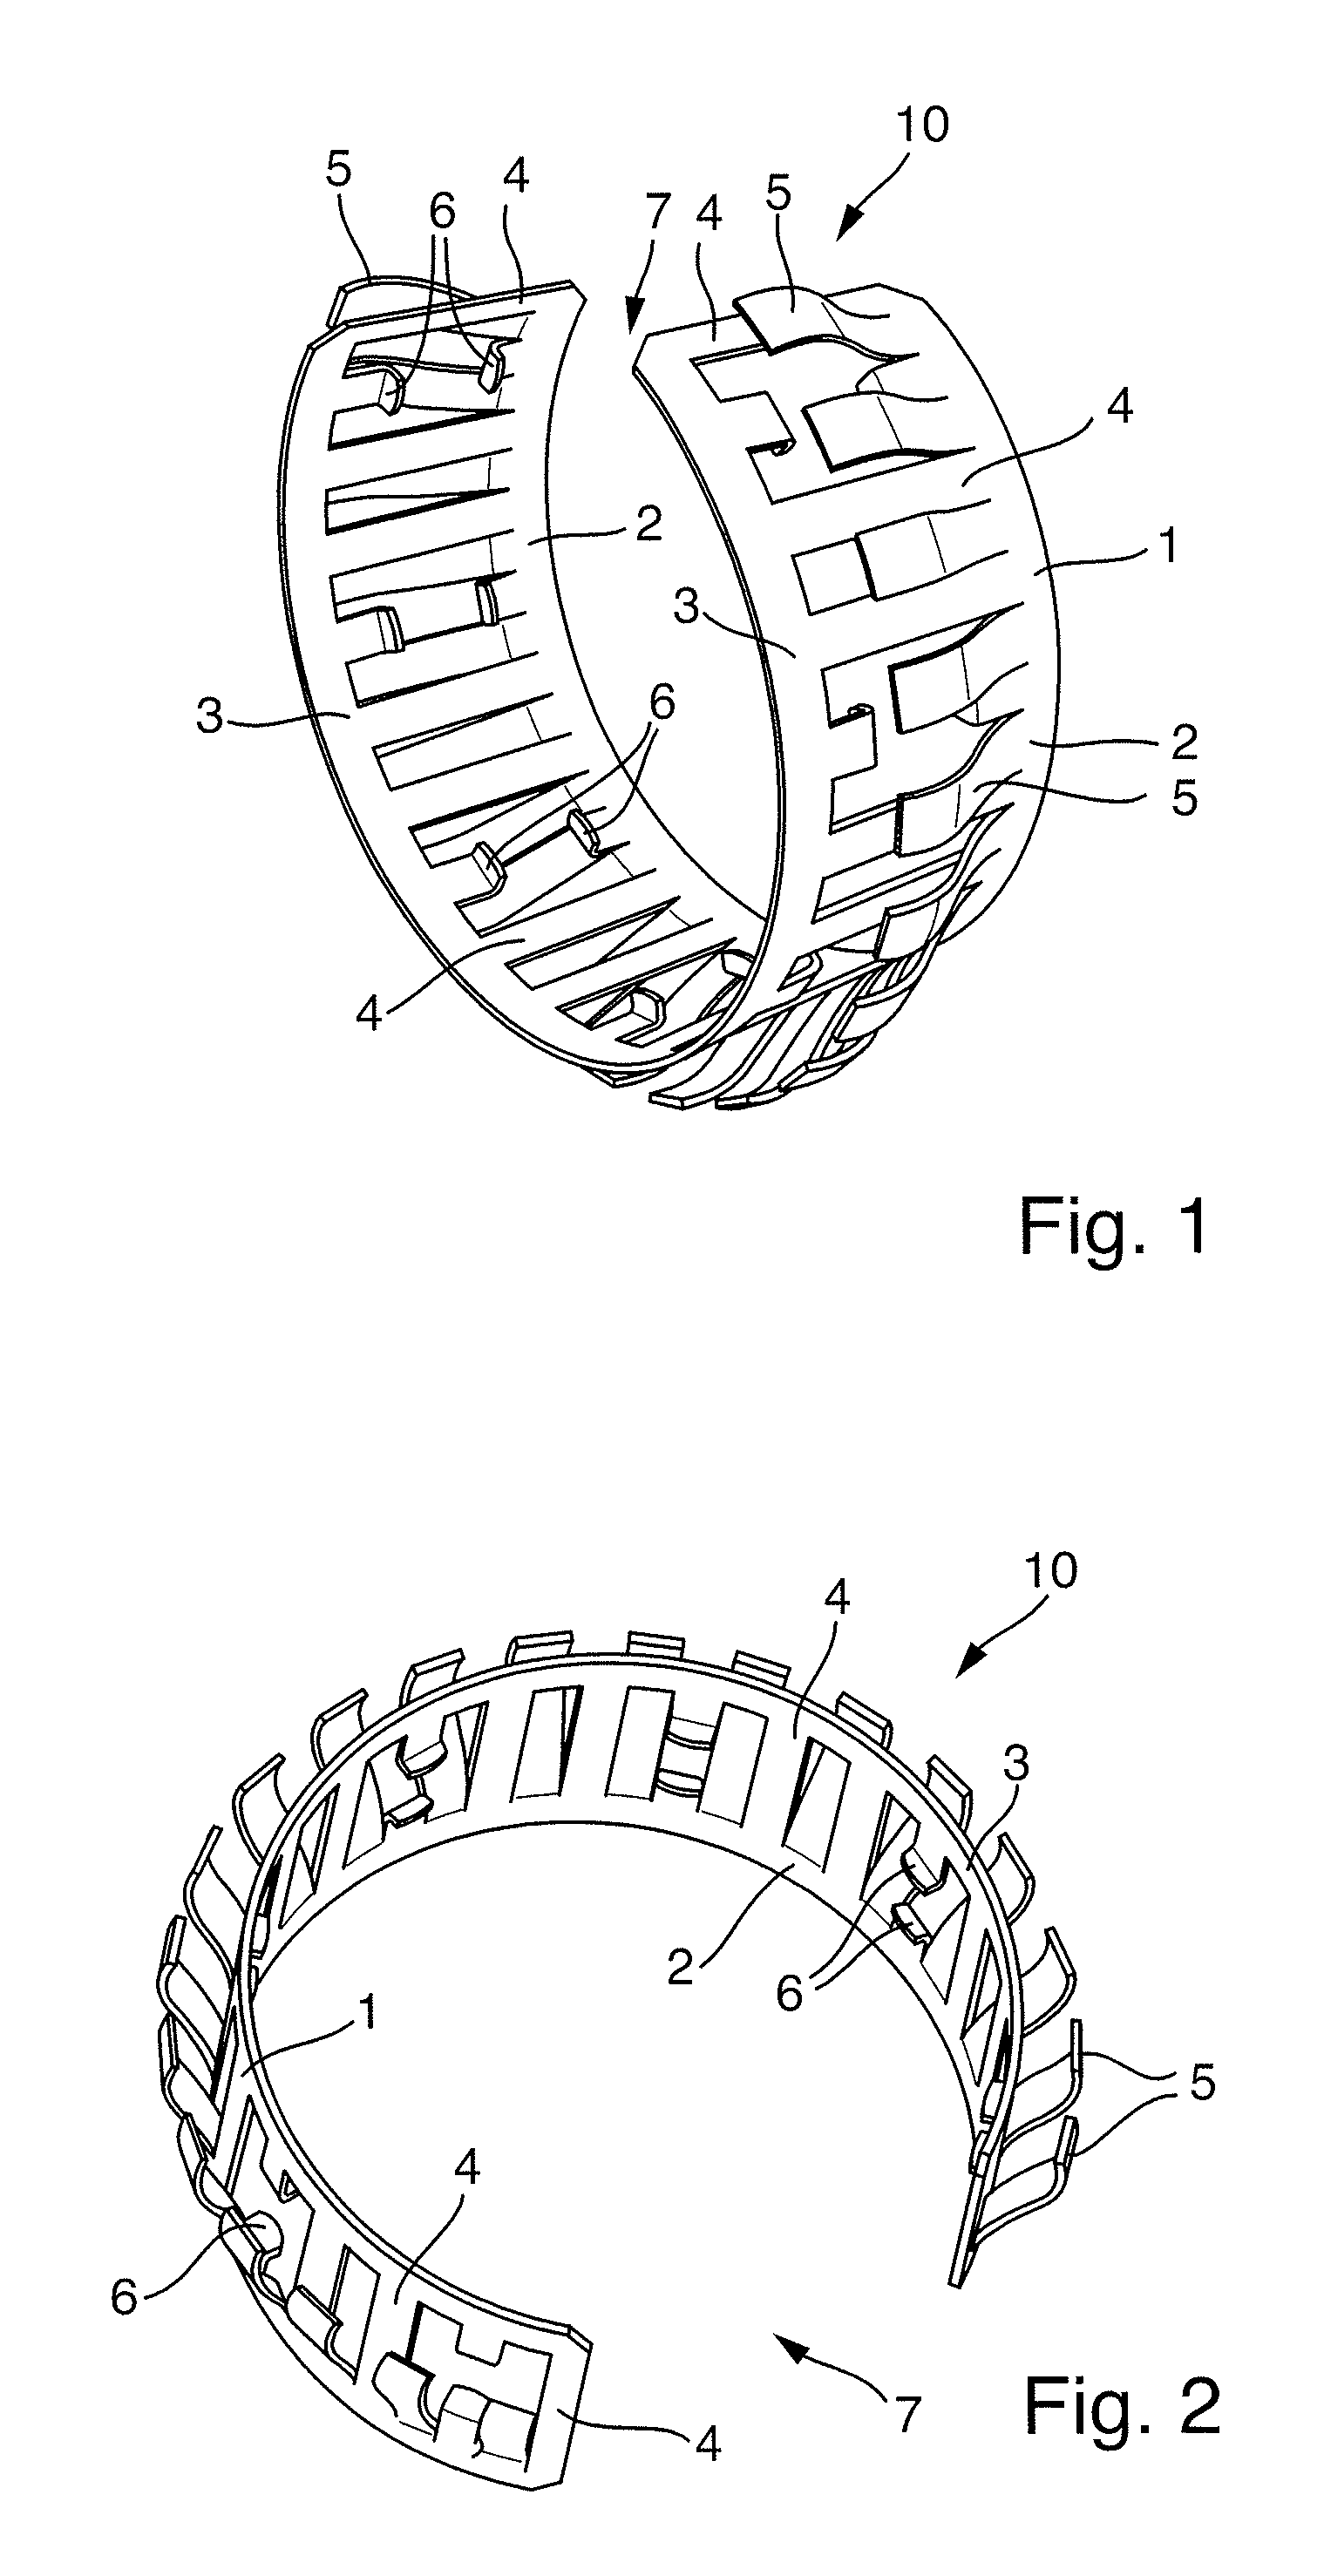 Spring clip for shielding of electrical connectors